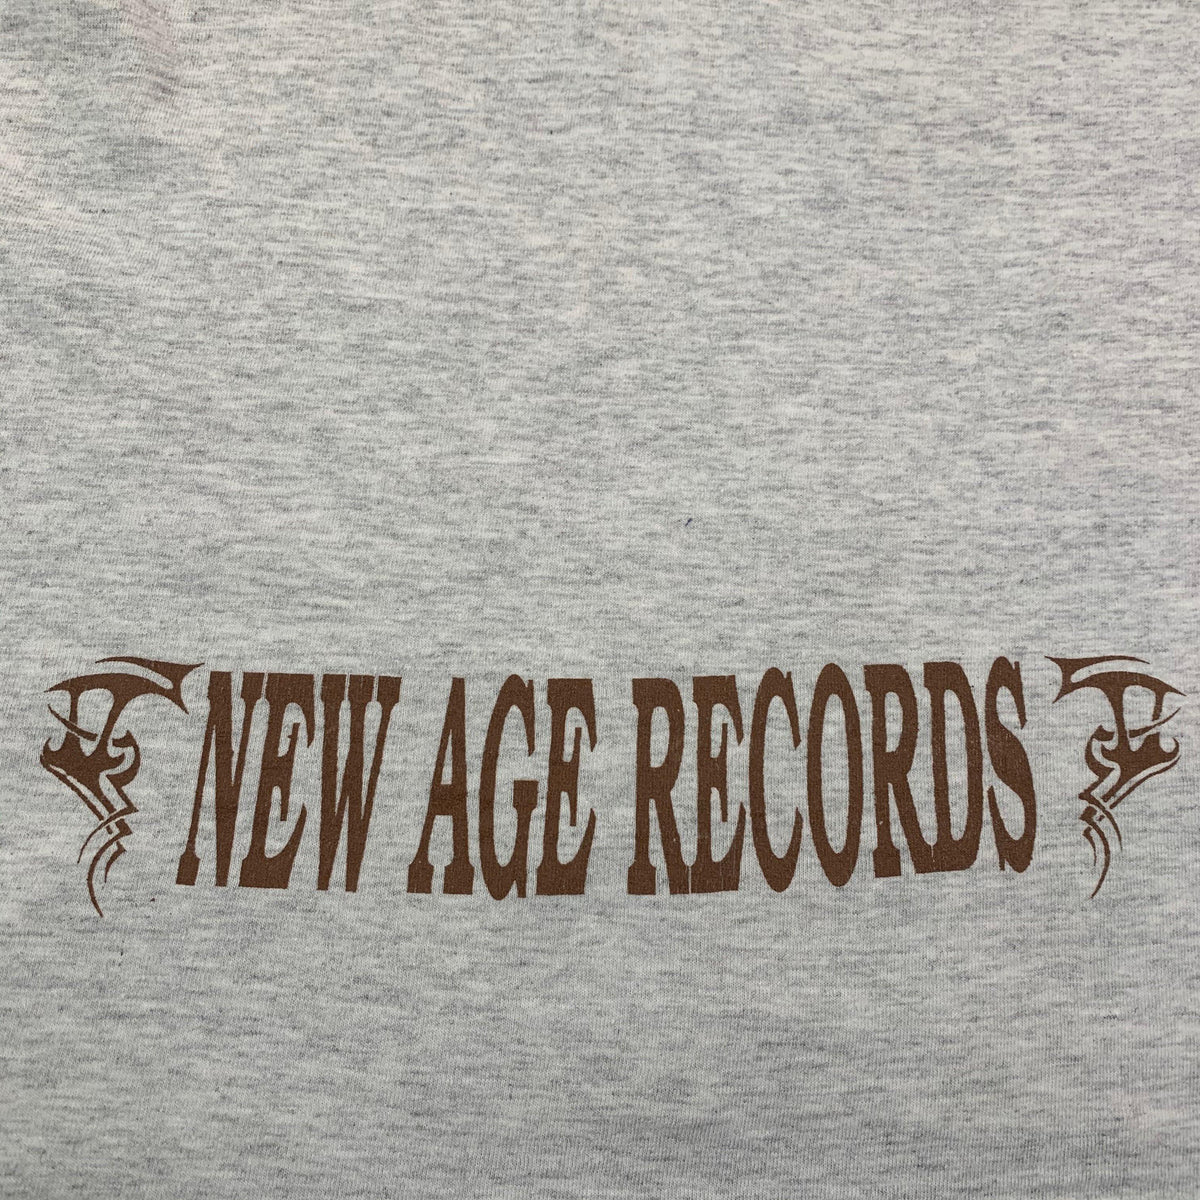 Vintage New Age Records &quot;Sign Language&quot; Long Sleeve Shirt - jointcustodydc